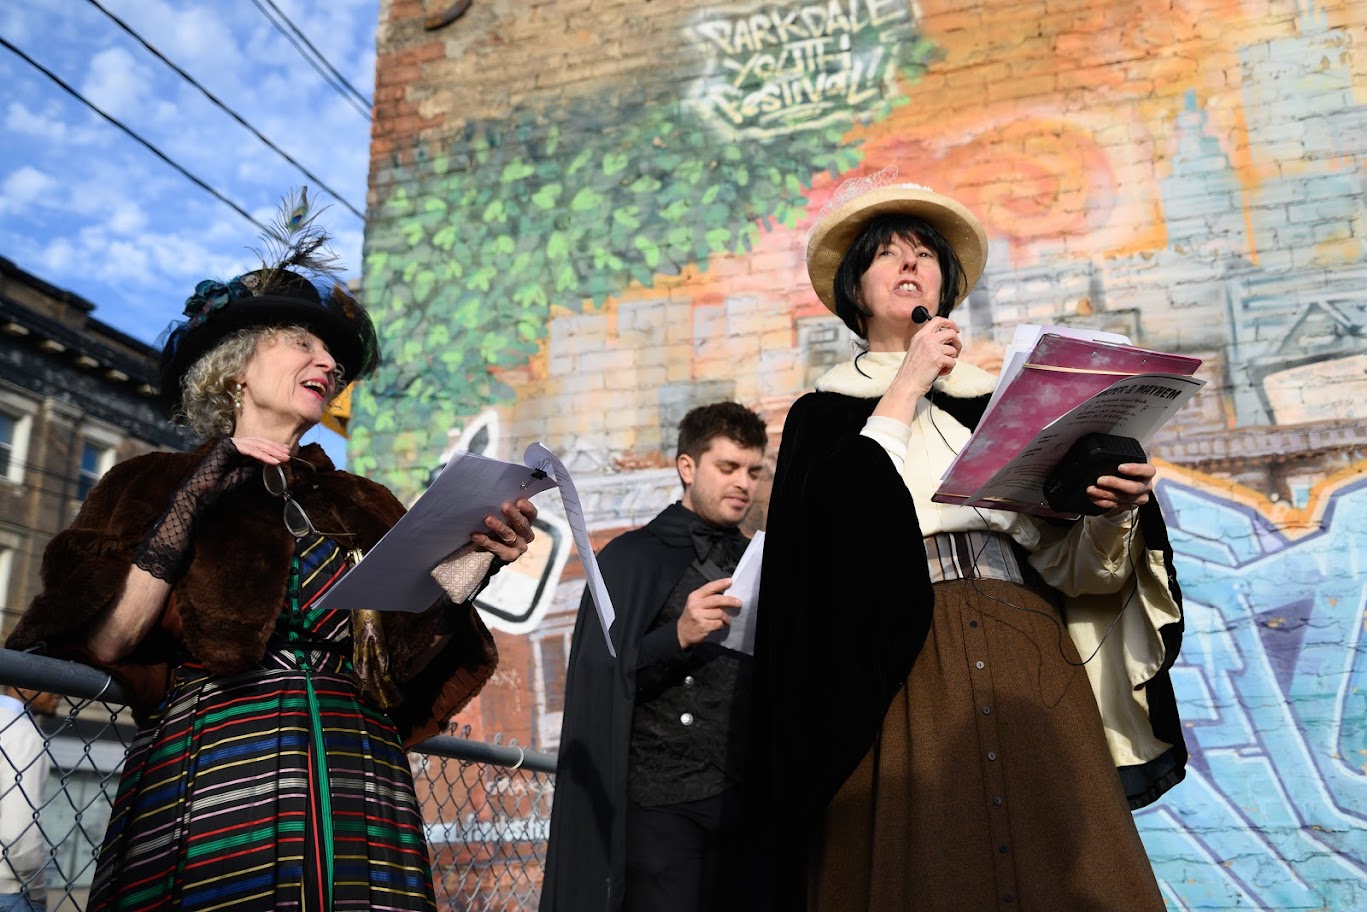 Three people stand in front of a colourful painted brick wall. They all are wearing typical nineteenth-century clothing. The woman on the right holds a microphone and papers in her hands.